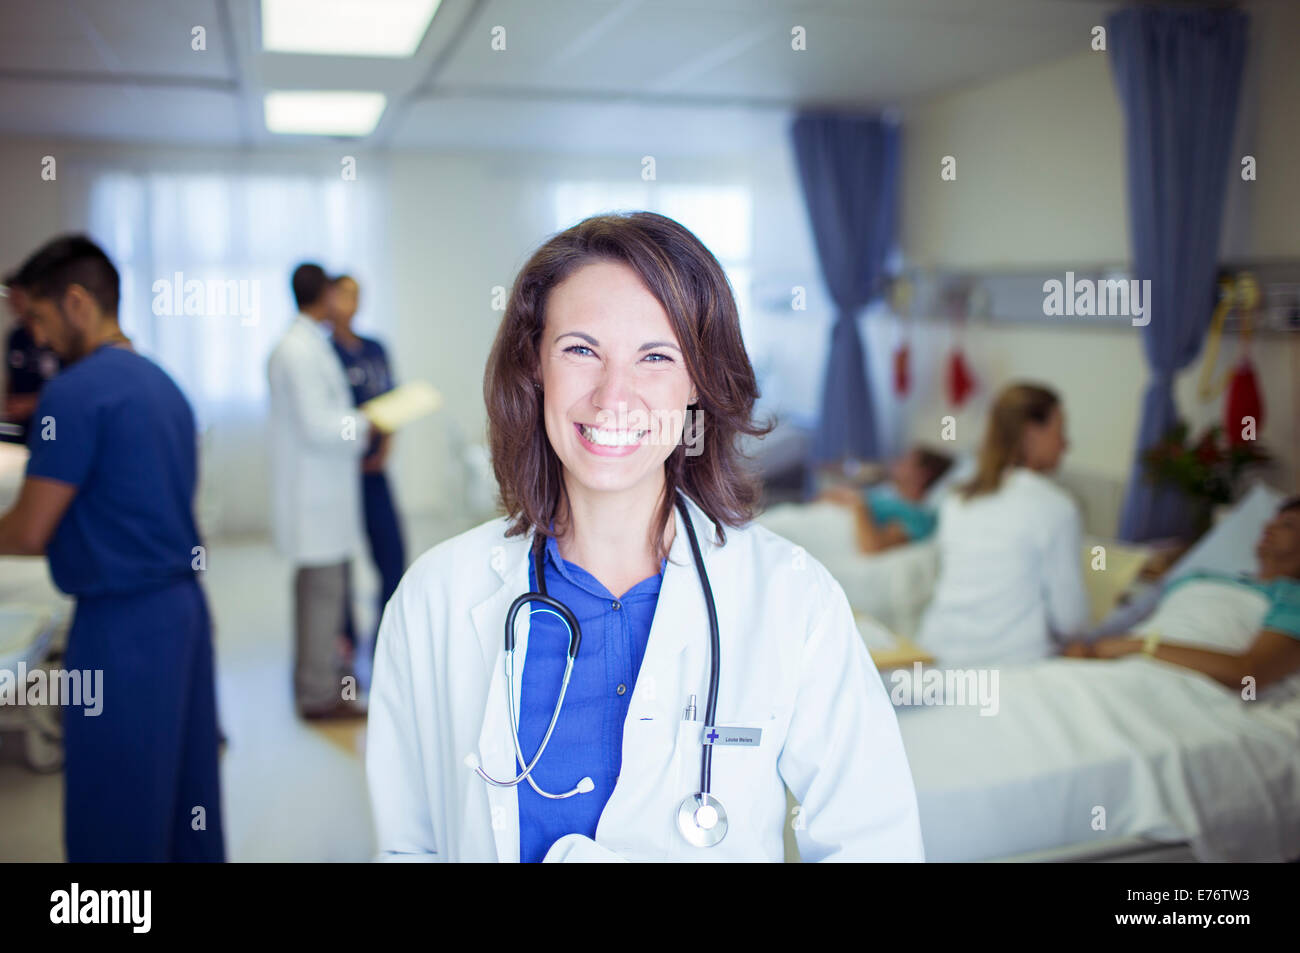 Doctor smiling in hospital room Stock Photo